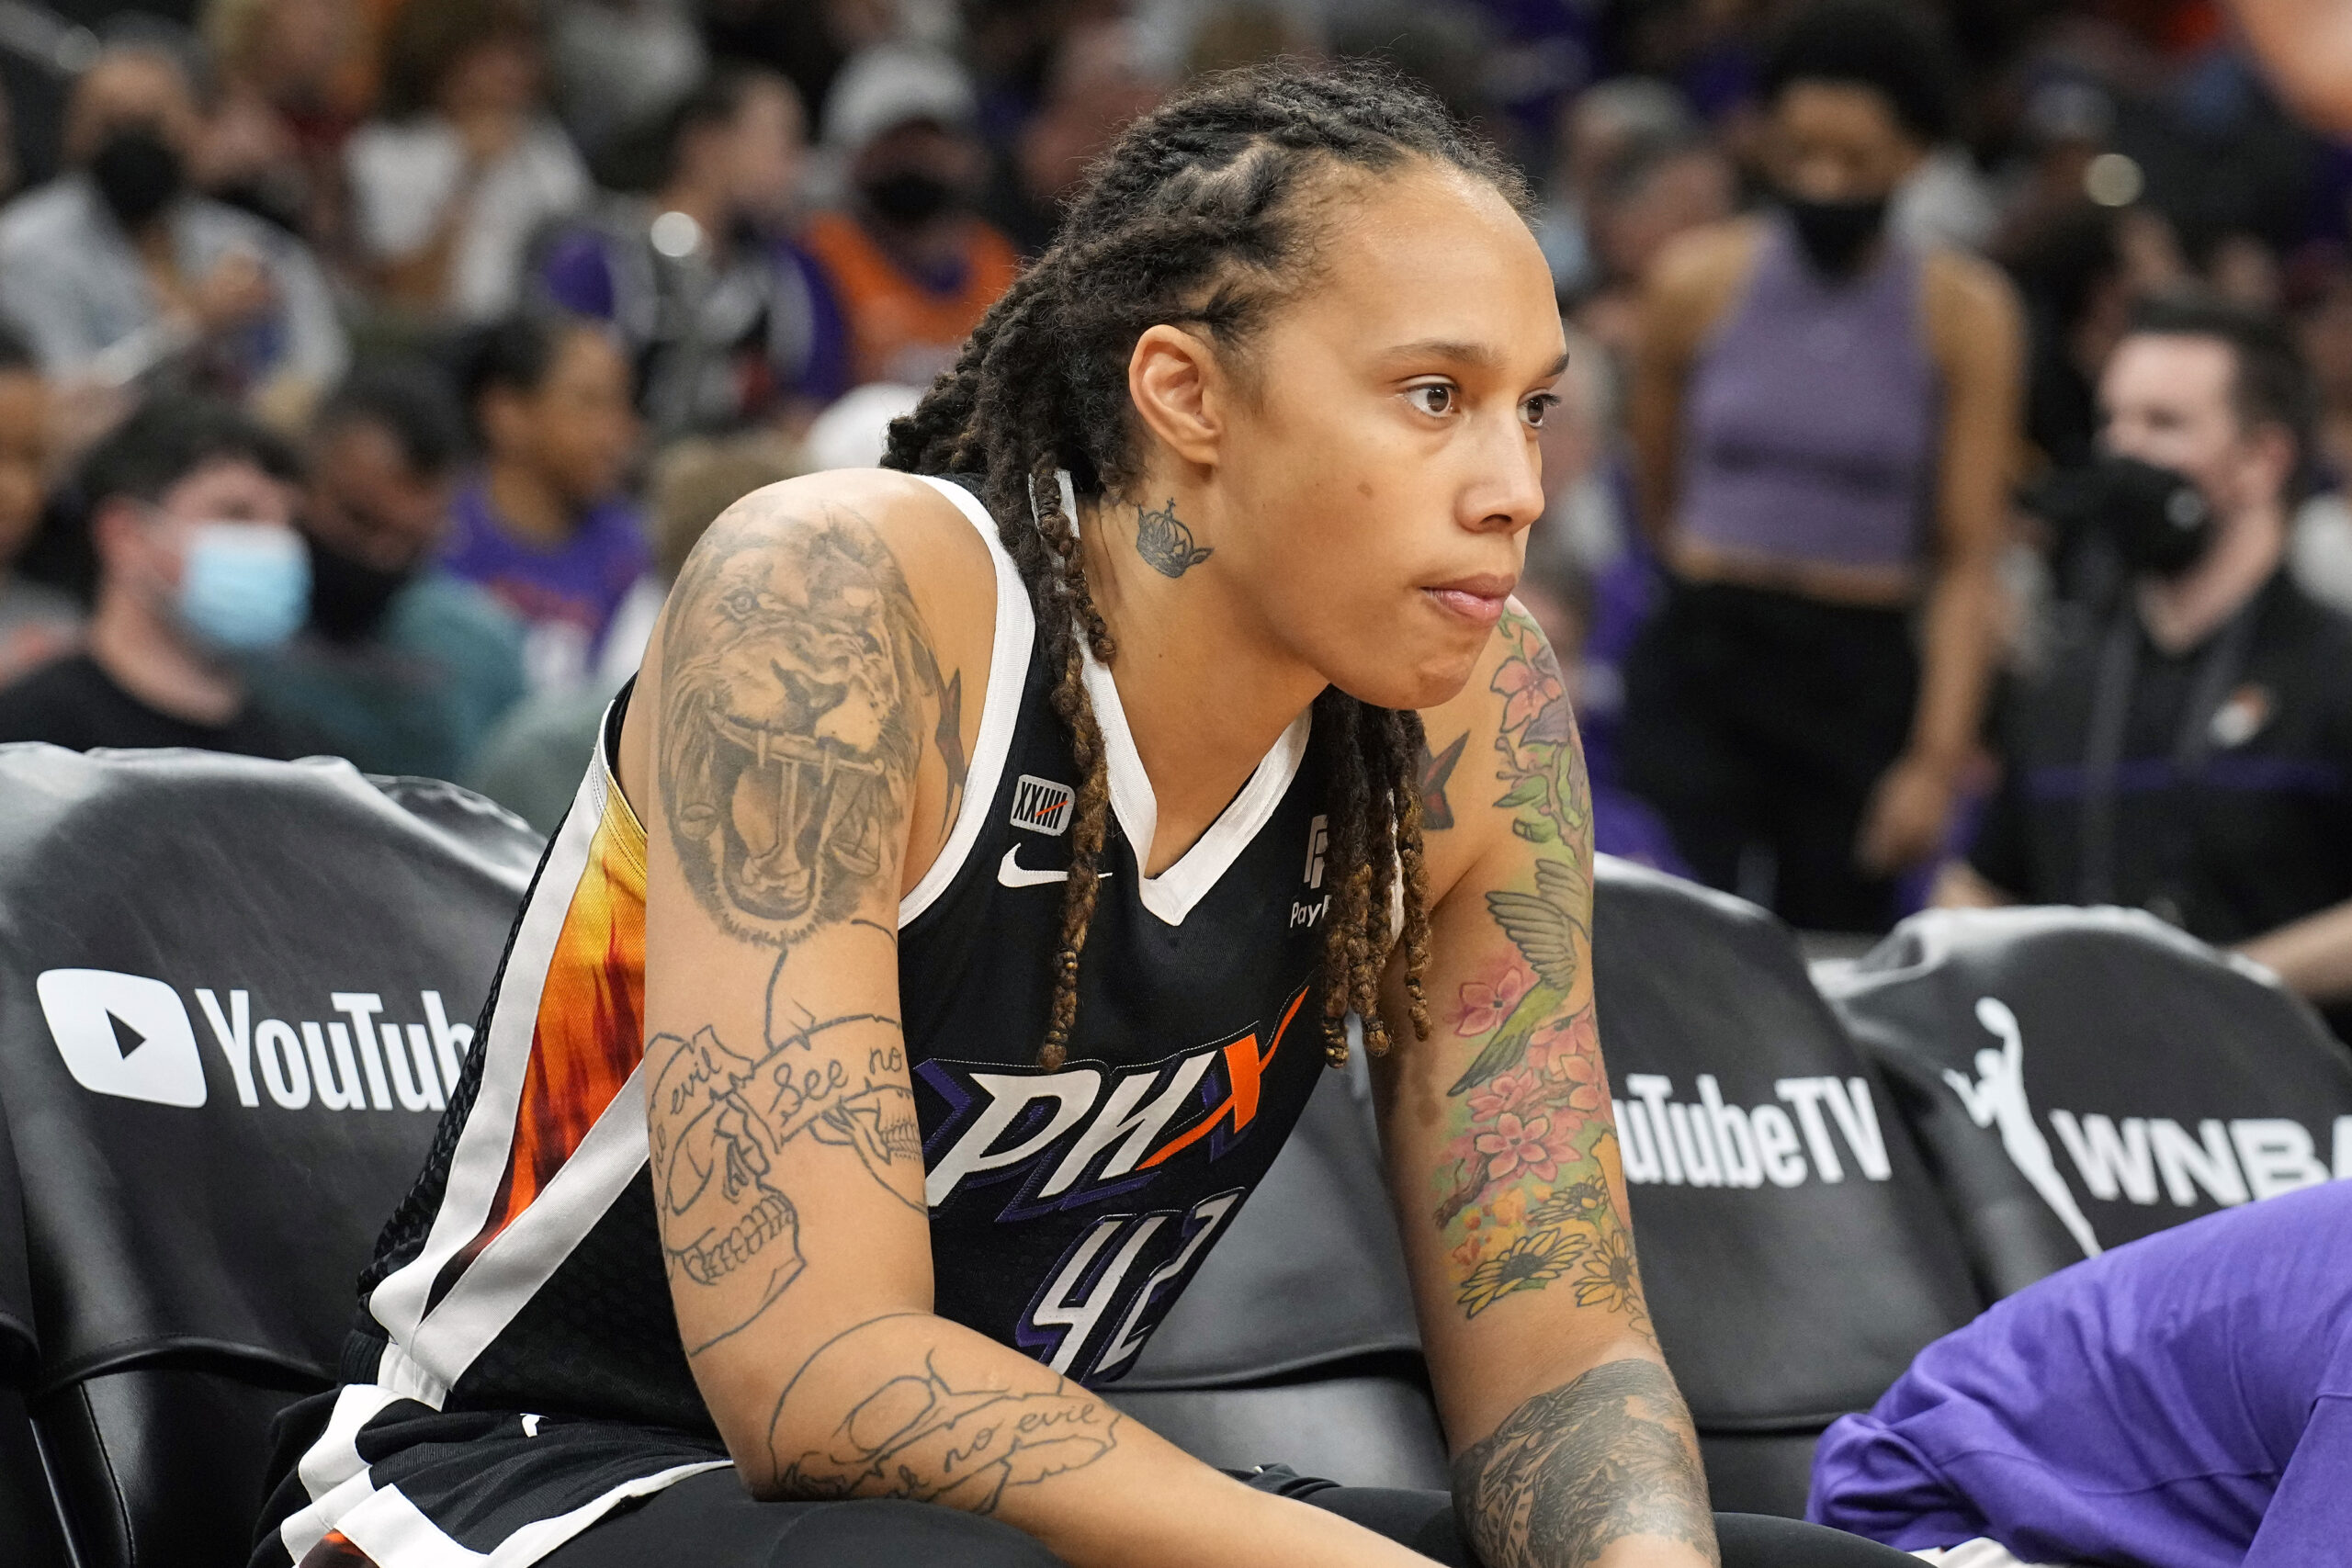 FILE - Phoenix Mercury center Brittney Griner sits during the first half of Game 2 of basketball's WNBA Finals against the Chicago Sky, Wednesday, Oct. 13, 2021, in Phoenix. Griner is easily the most prominent American citizen known to be jailed by a foreign government. Yet as a crucial hearing approaches next month, the case against her remains shrouded in mystery, with little clarity from the Russian prosecutors. (AP Photo/Rick Scuteri, File)